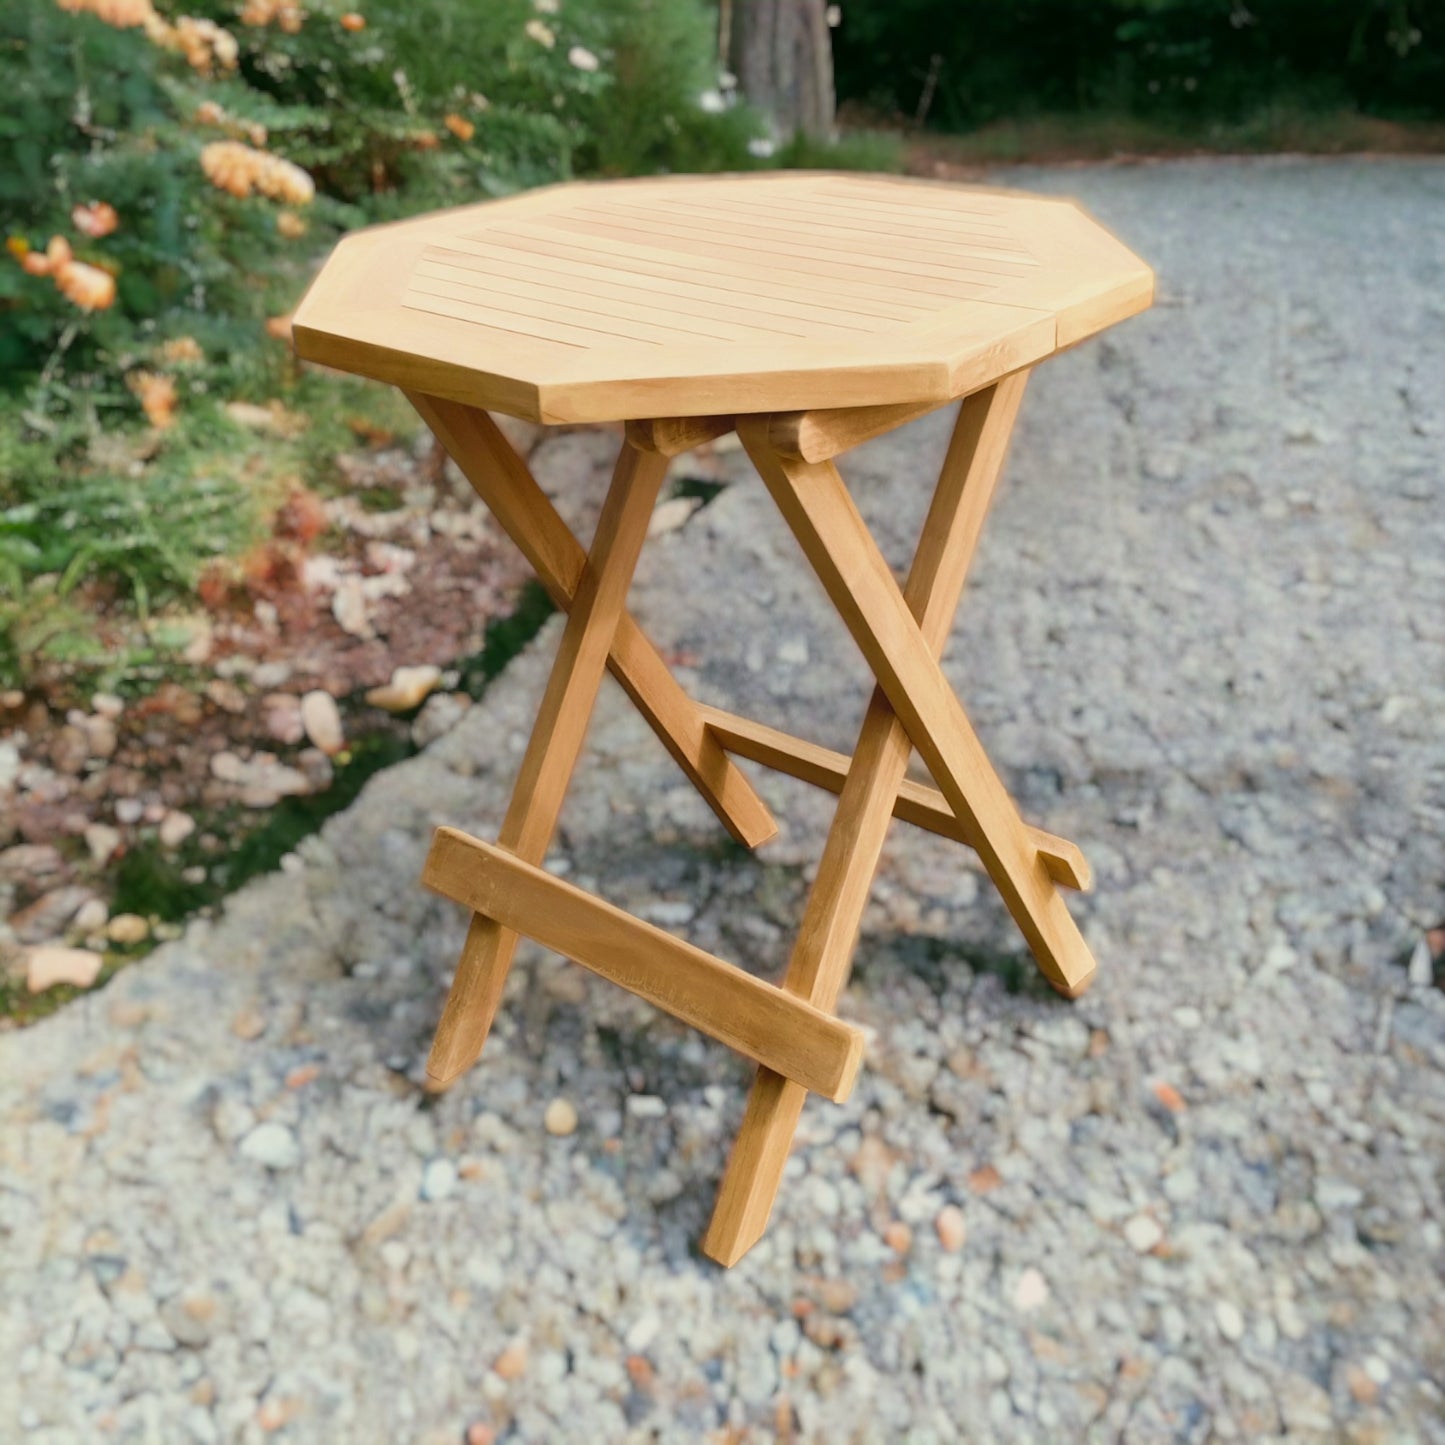 BRENTWOOD + PICNIC TABLE Outdoor Set | 2 Wicker Chairs with 1 Teak Wood Side Table (Octagonal)